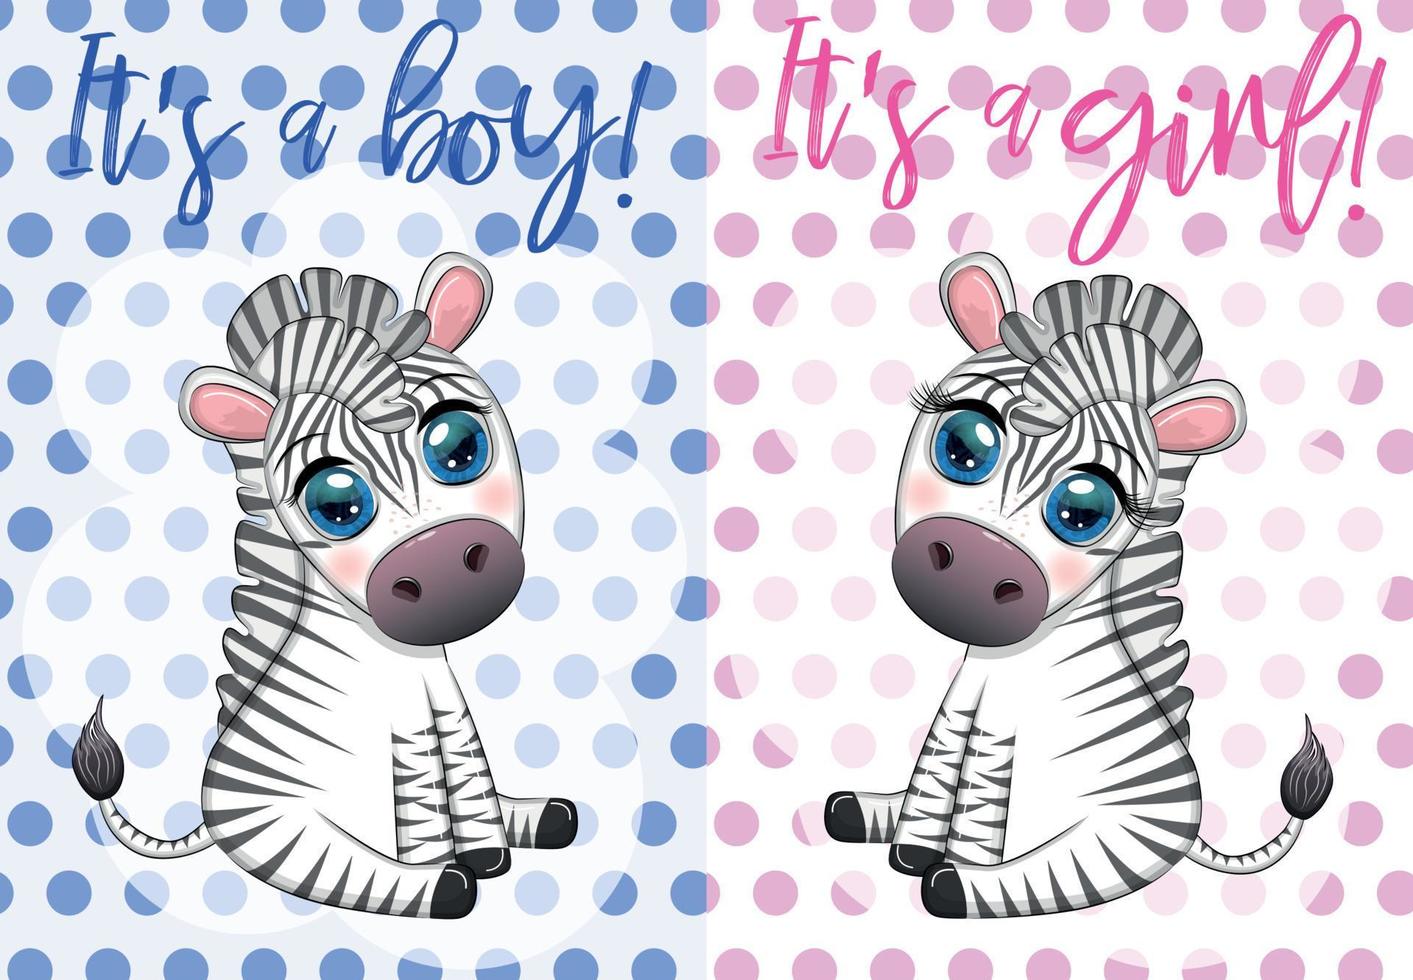 Card It's a boy, It's a girl with a cute cartoon zebra sitting. Children's holiday of the newborn, baby shower vector